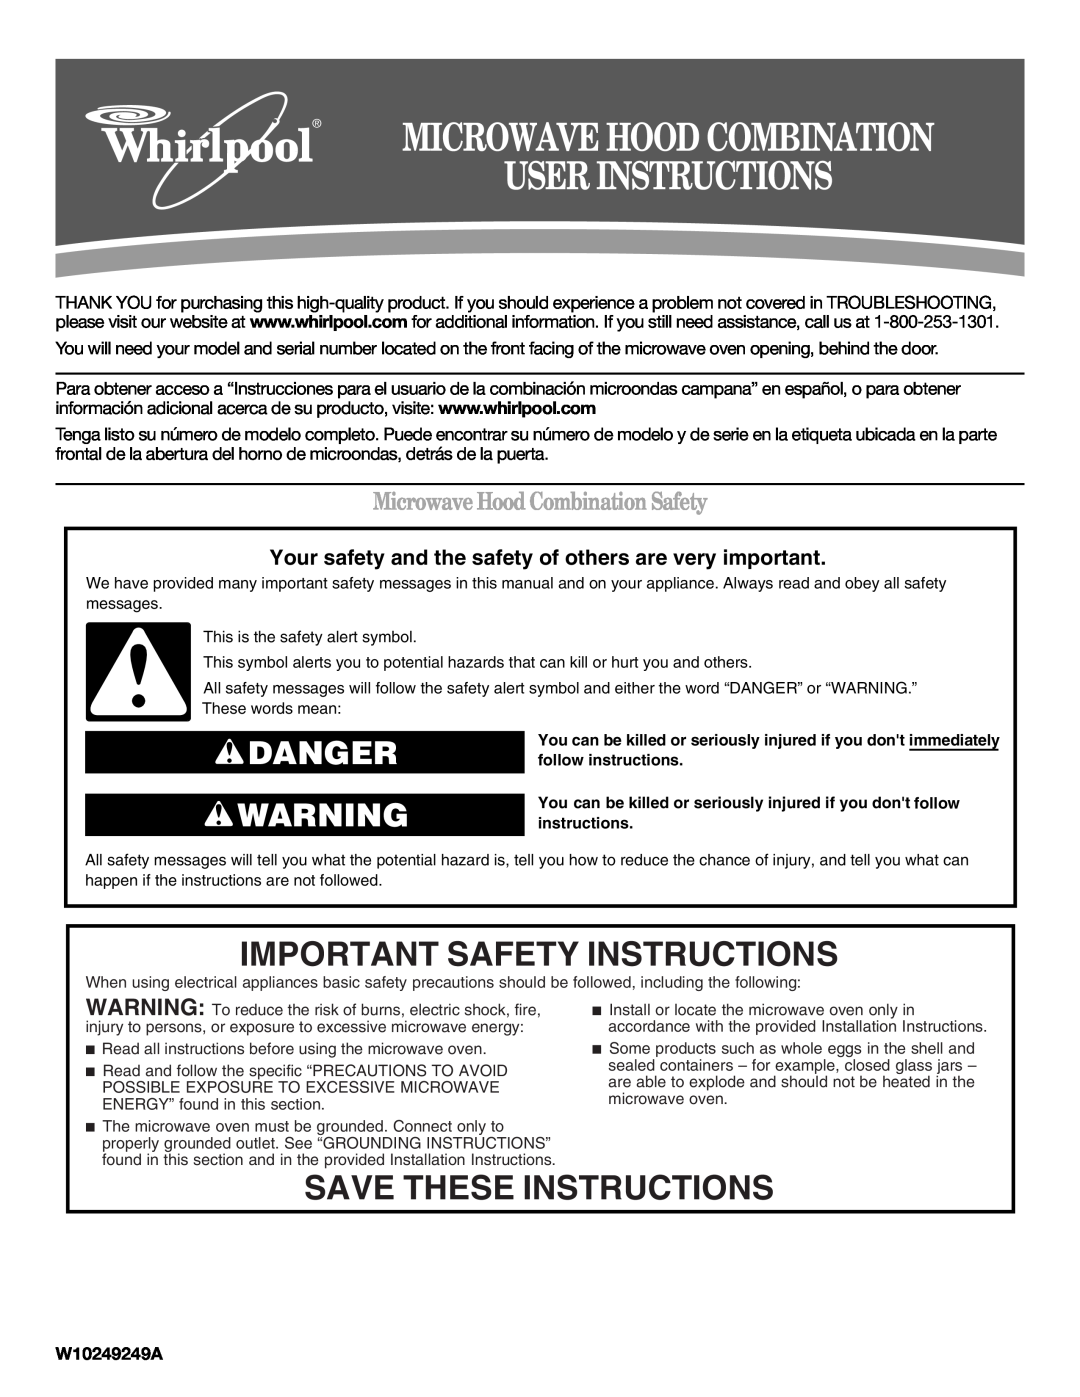 Whirlpool WMH76718AB important safety instructions Important Safety Instructions, Save These Instructions, W10249249A 